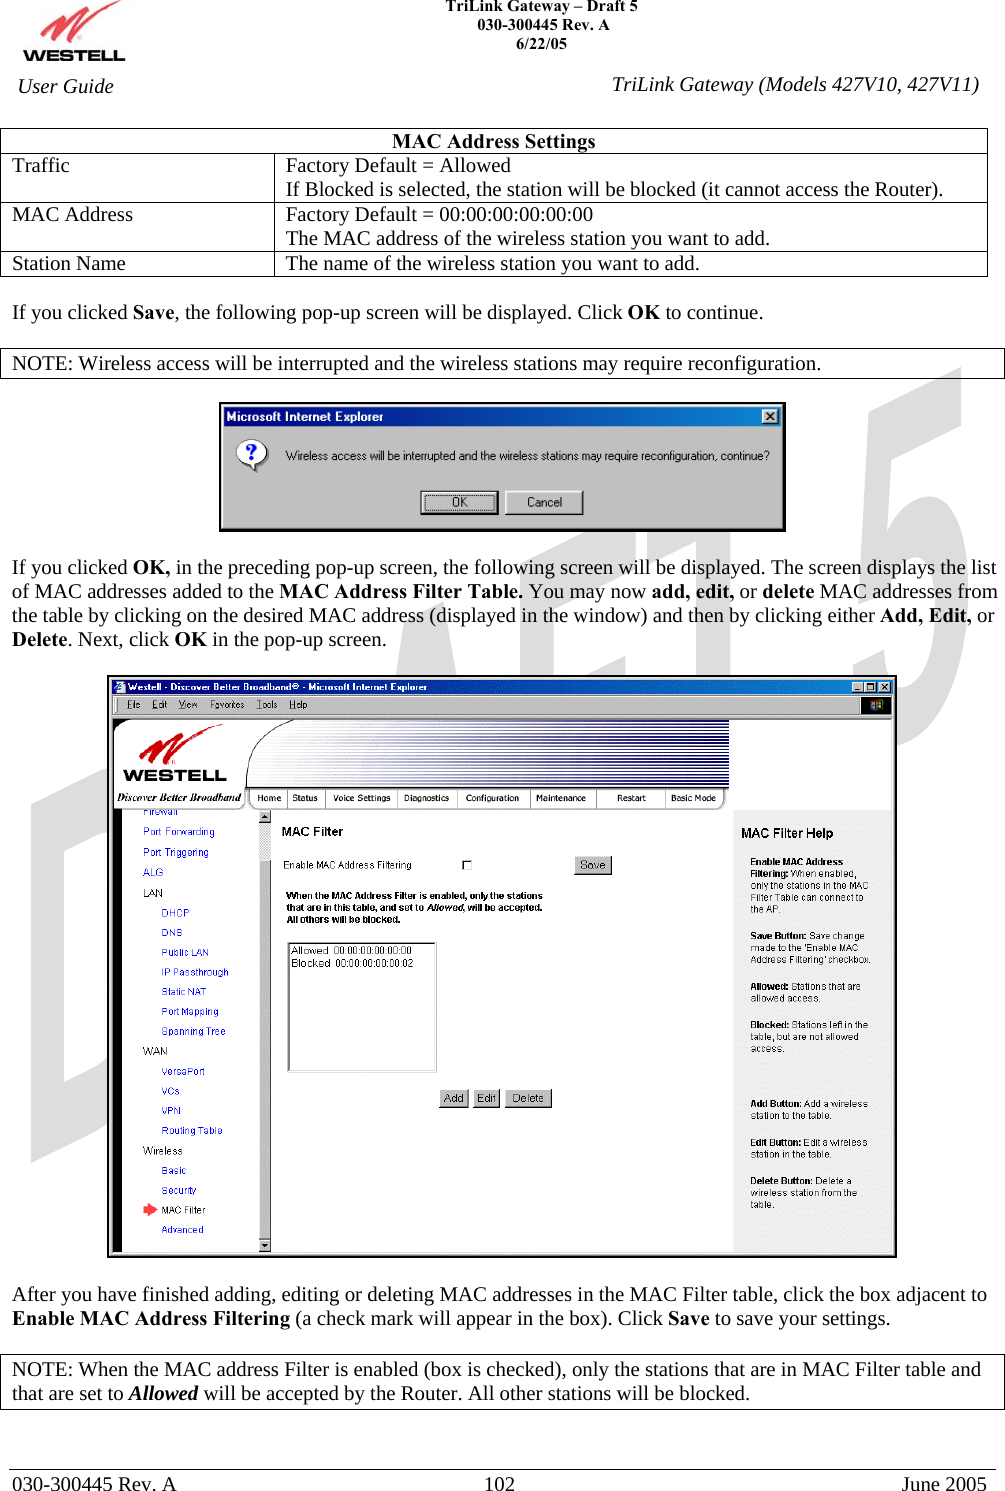    TriLink Gateway – Draft 5   030-300445 Rev. A 6/22/05   030-300445 Rev. A  102  June 2005  User Guide  TriLink Gateway (Models 427V10, 427V11)MAC Address Settings Traffic  Factory Default = Allowed If Blocked is selected, the station will be blocked (it cannot access the Router). MAC Address  Factory Default = 00:00:00:00:00:00 The MAC address of the wireless station you want to add. Station Name  The name of the wireless station you want to add.  If you clicked Save, the following pop-up screen will be displayed. Click OK to continue.  NOTE: Wireless access will be interrupted and the wireless stations may require reconfiguration.    If you clicked OK, in the preceding pop-up screen, the following screen will be displayed. The screen displays the list of MAC addresses added to the MAC Address Filter Table. You may now add, edit, or delete MAC addresses from the table by clicking on the desired MAC address (displayed in the window) and then by clicking either Add, Edit, or Delete. Next, click OK in the pop-up screen.     After you have finished adding, editing or deleting MAC addresses in the MAC Filter table, click the box adjacent to Enable MAC Address Filtering (a check mark will appear in the box). Click Save to save your settings.  NOTE: When the MAC address Filter is enabled (box is checked), only the stations that are in MAC Filter table and that are set to Allowed will be accepted by the Router. All other stations will be blocked.   